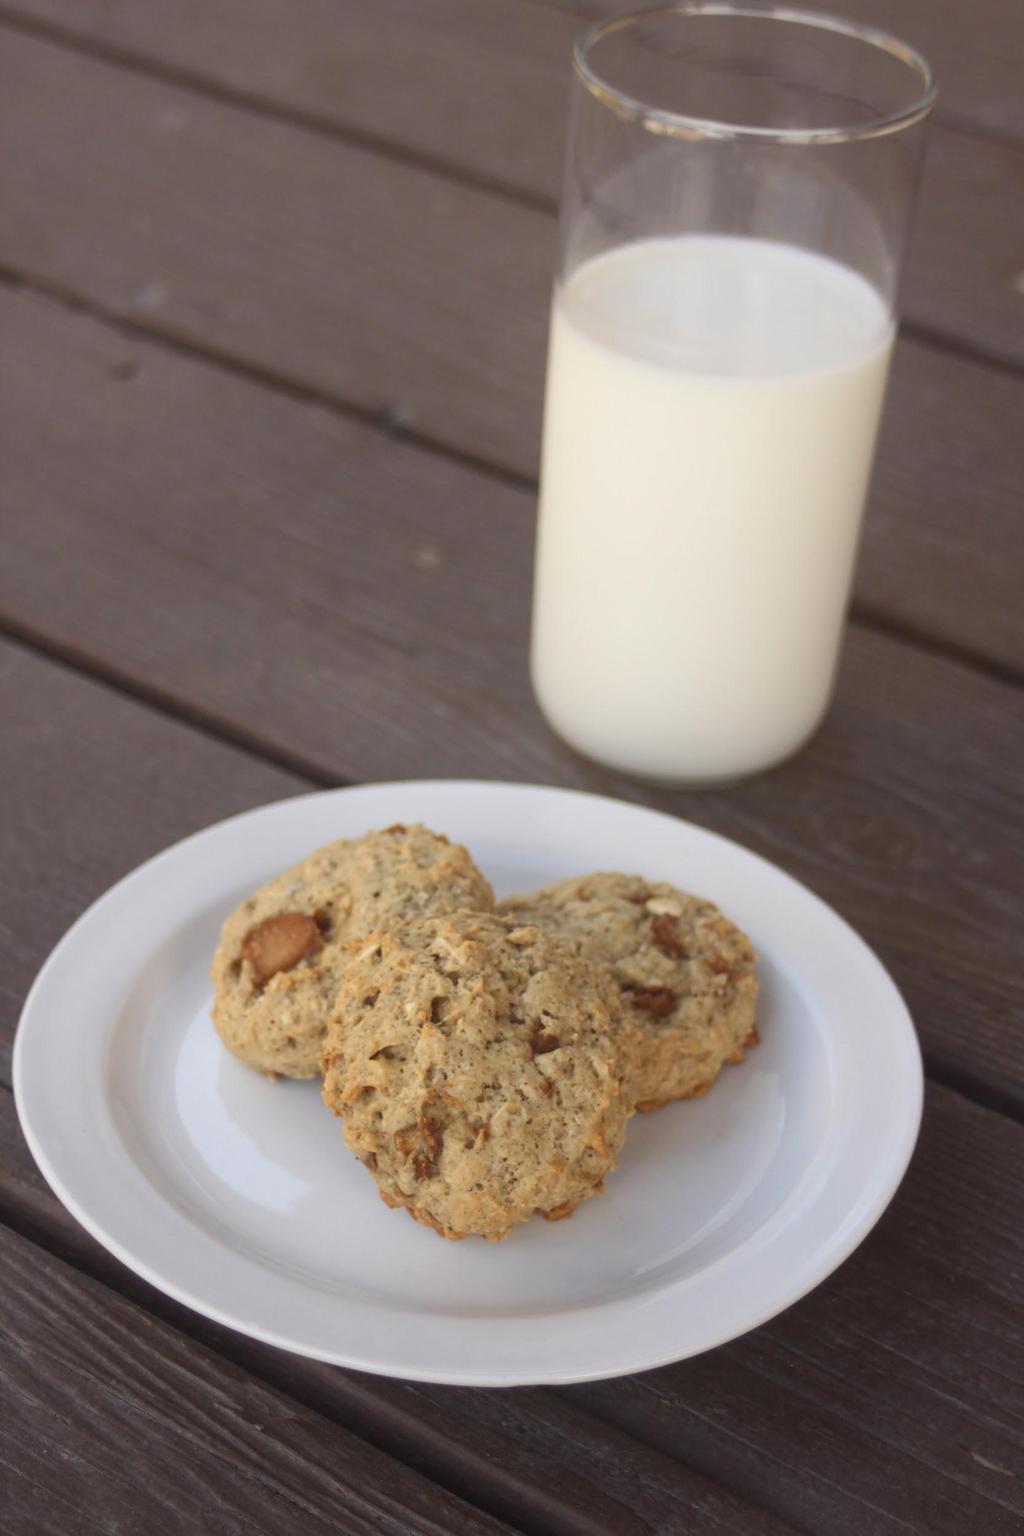 TEA INFUSED APPLE OATMEAL COOKIES ½ Cup Dried Apples, Chopped (sometimes it's easier to snip with scissors) 1 Cup Strong Black Tea ⅓ Cup Butter 1 ½ Cups Sugar 1 teaspoon Vanilla Extract 2 ½ Cups